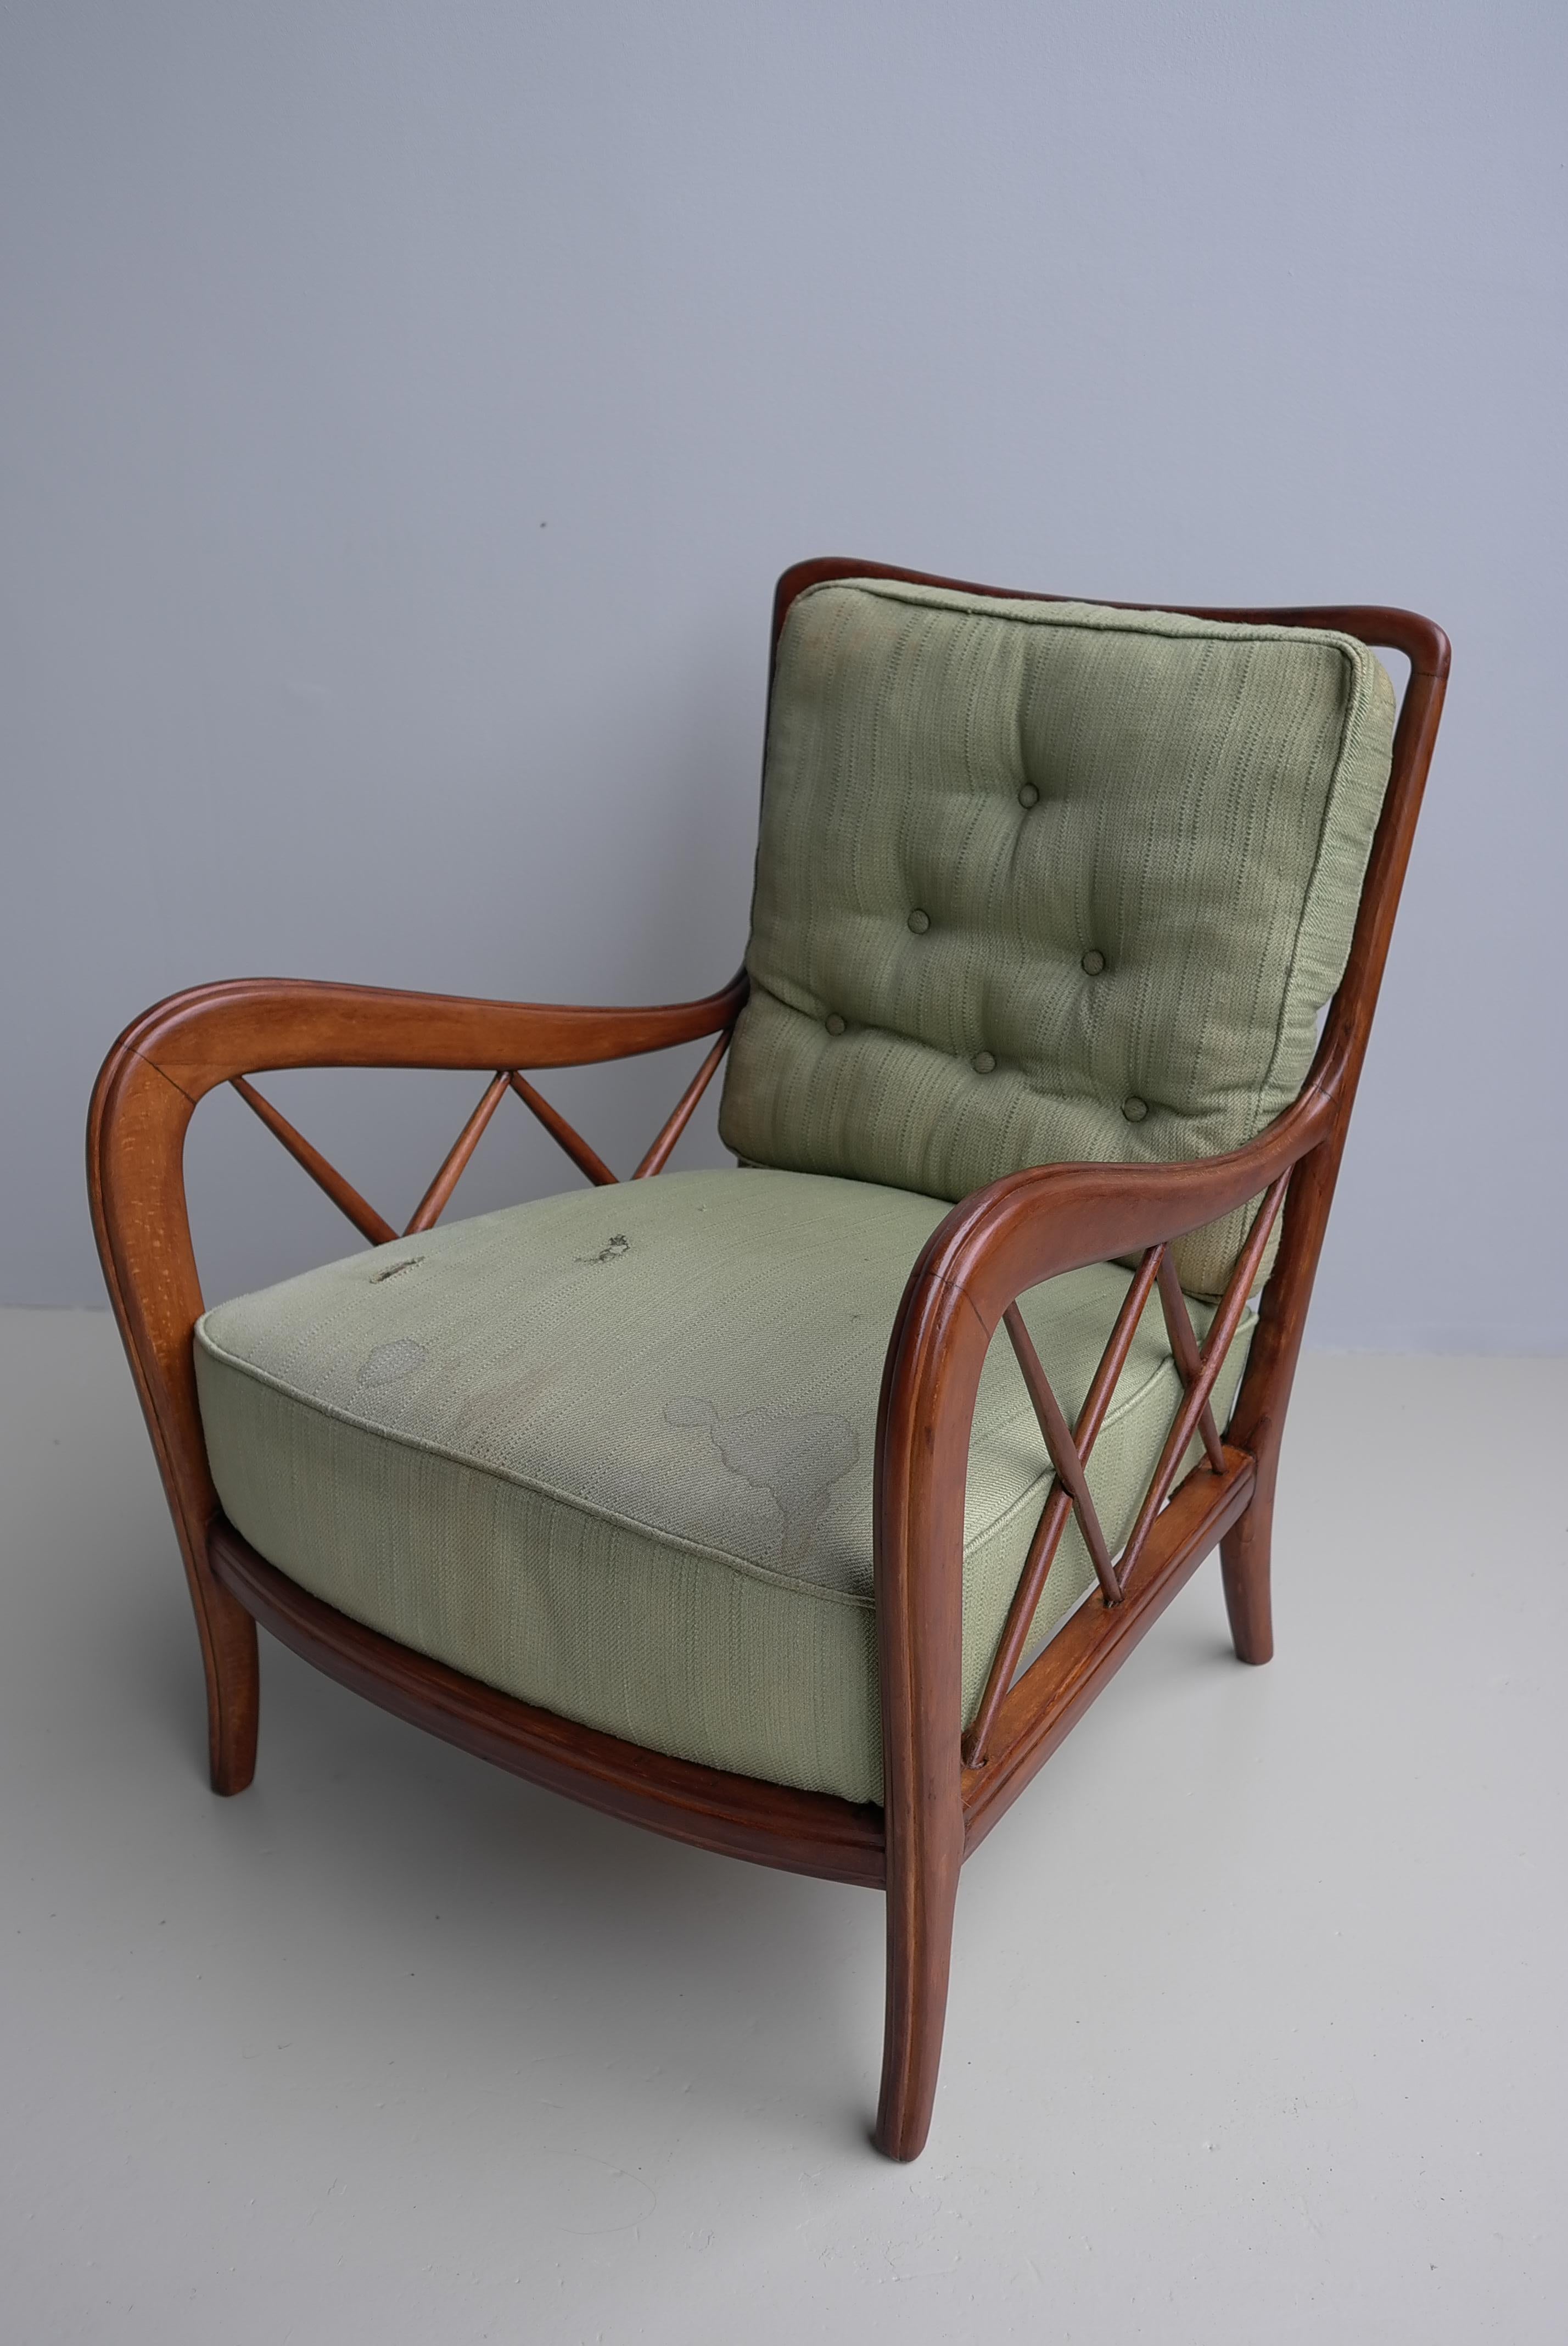 Fabric Walnut Wooden Lounge Chairs attr Paolo Buffa, Milan Italy 1940's For Sale